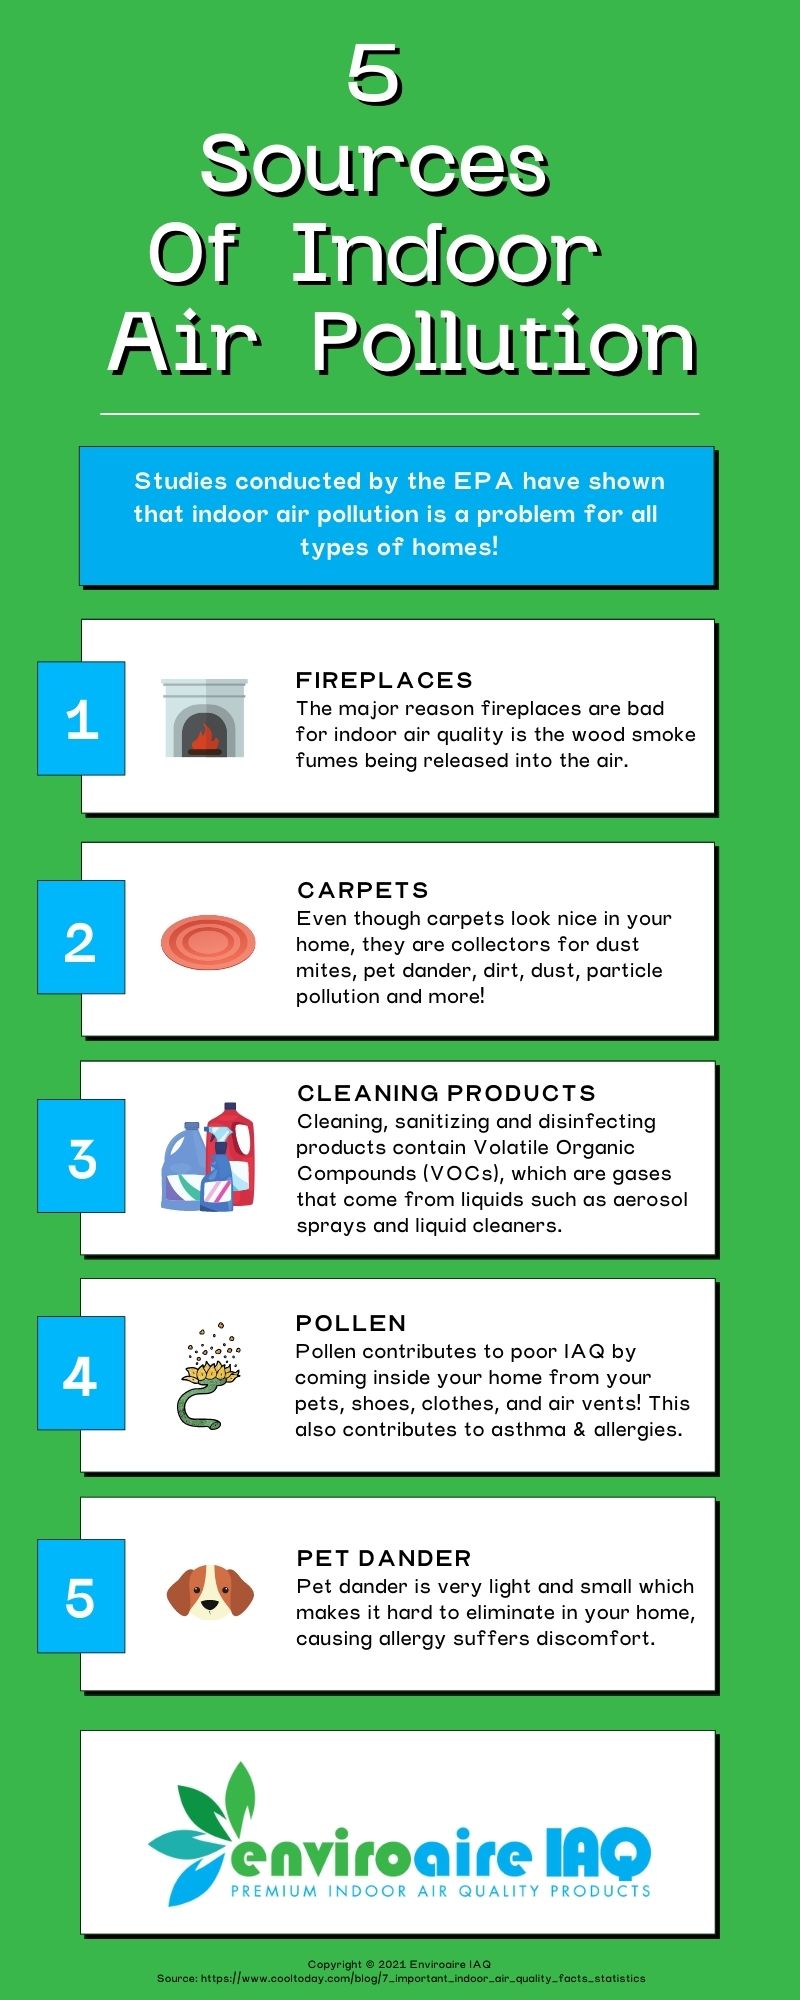 5 Sources of Indoor Air Pollution